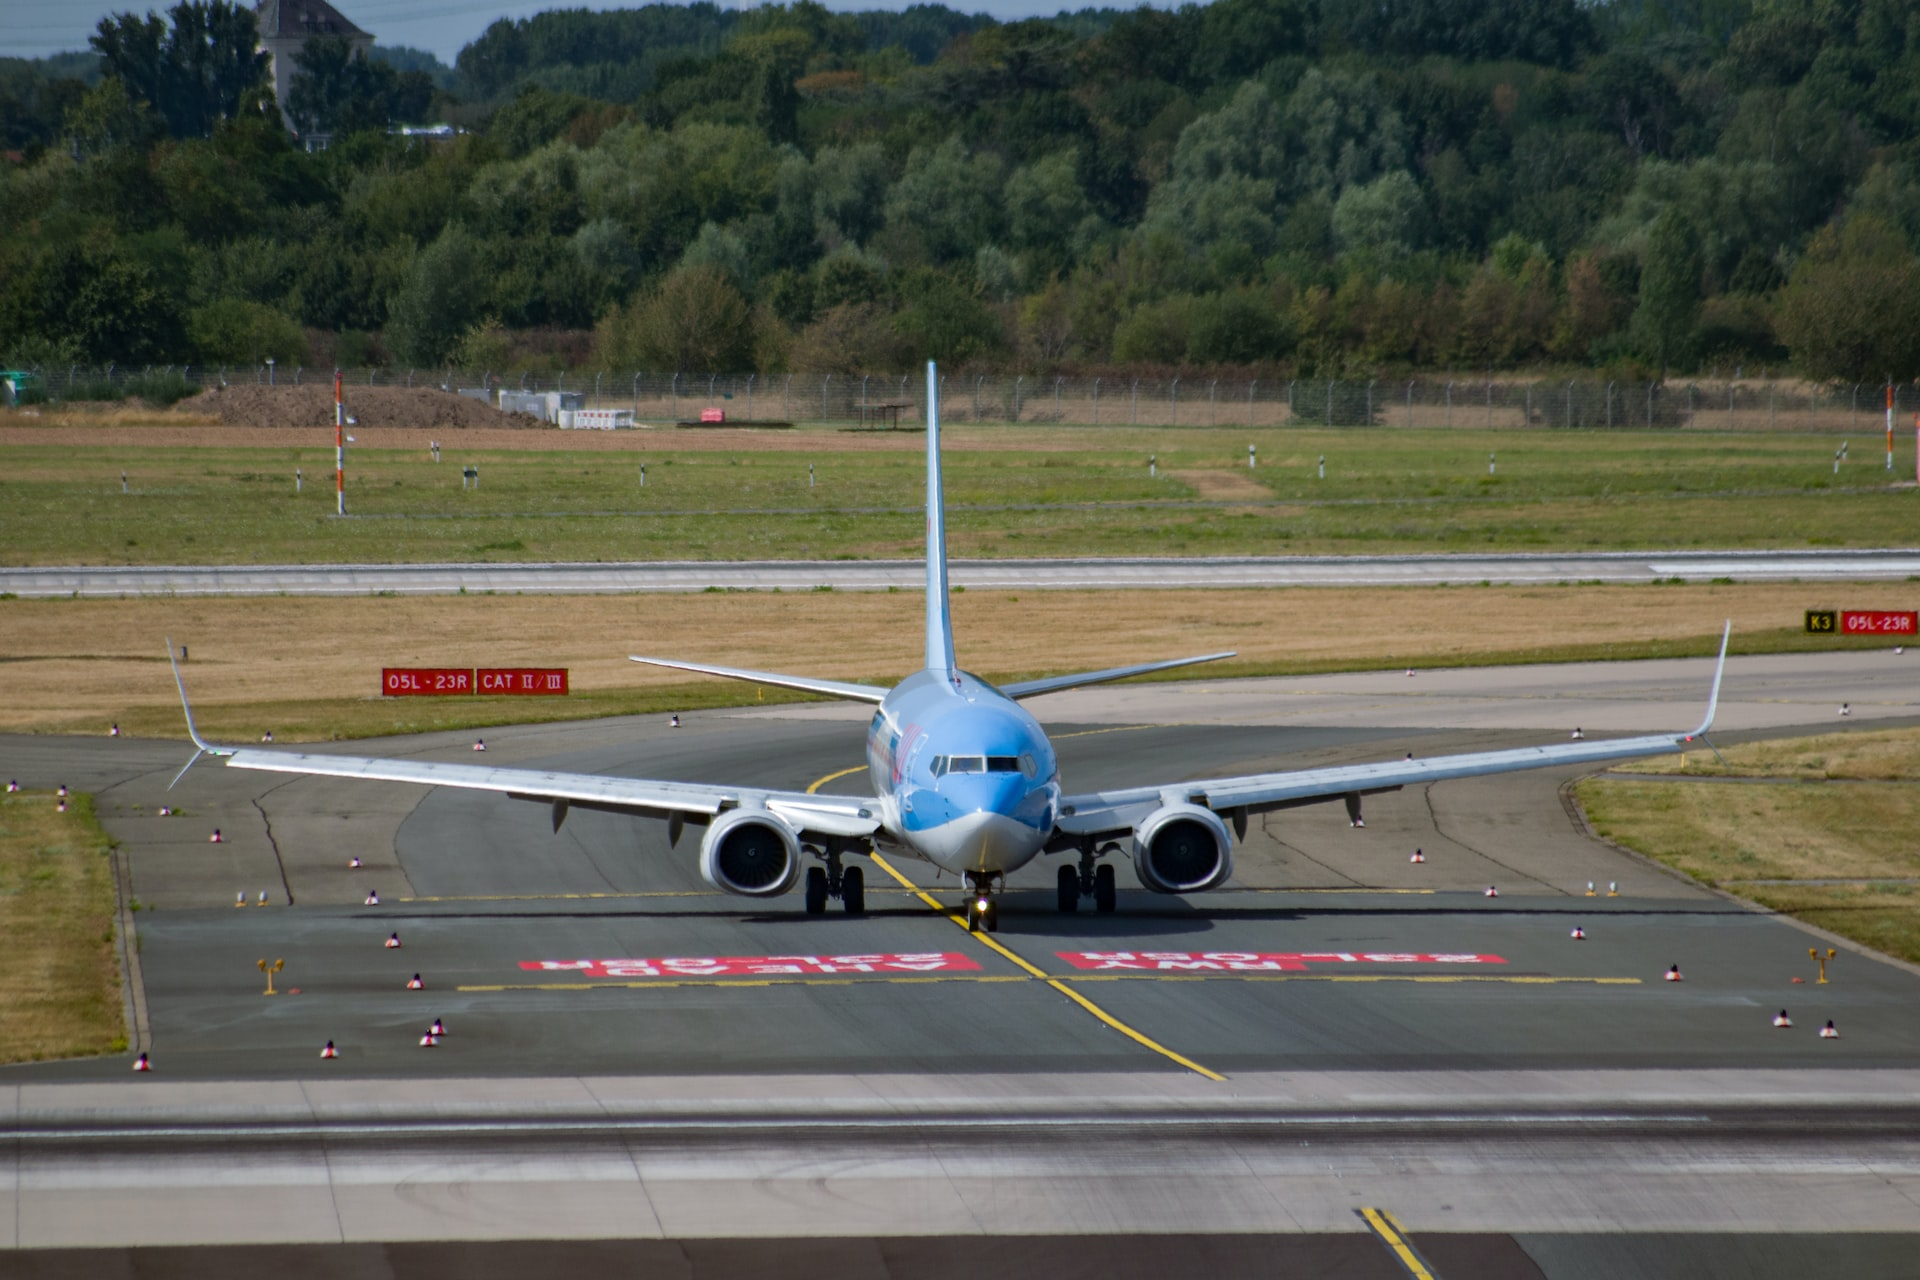 An aircraft passing hold short lines on the runway.